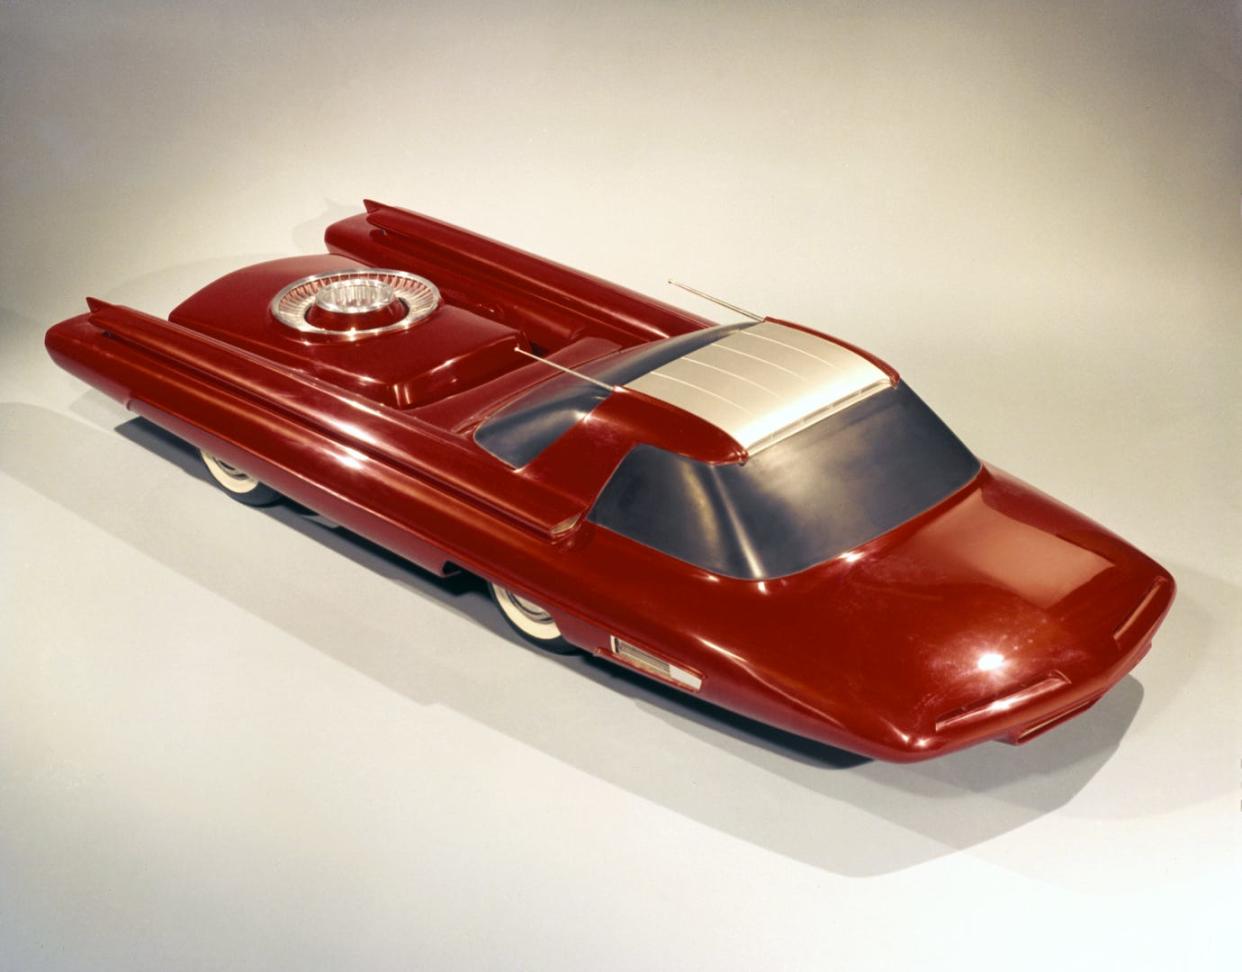 This 1958 Ford Nucleon is among 100 concept car images that Ford Motor Co. just added to its online archive site. Images are now available to the public for free downloading.